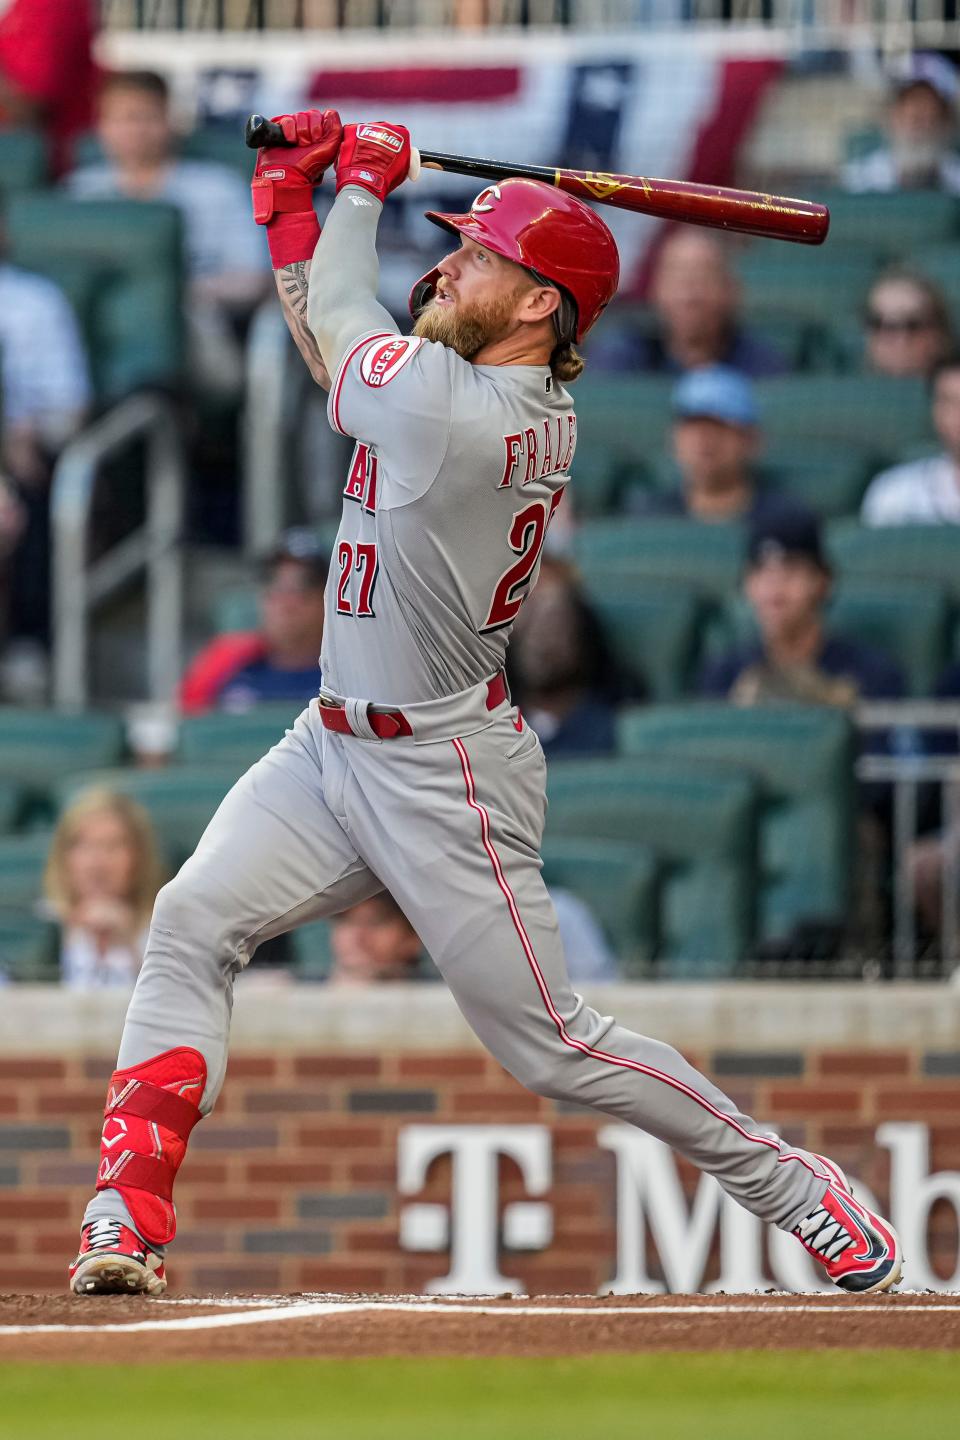 Apr 12, 2023; Cumberland, Georgia, USA; Cincinnati Reds right fielder Jake Fraley (27) hits a sacrifice fly ball against the Atlanta Braves during the first inning at Truist Park.